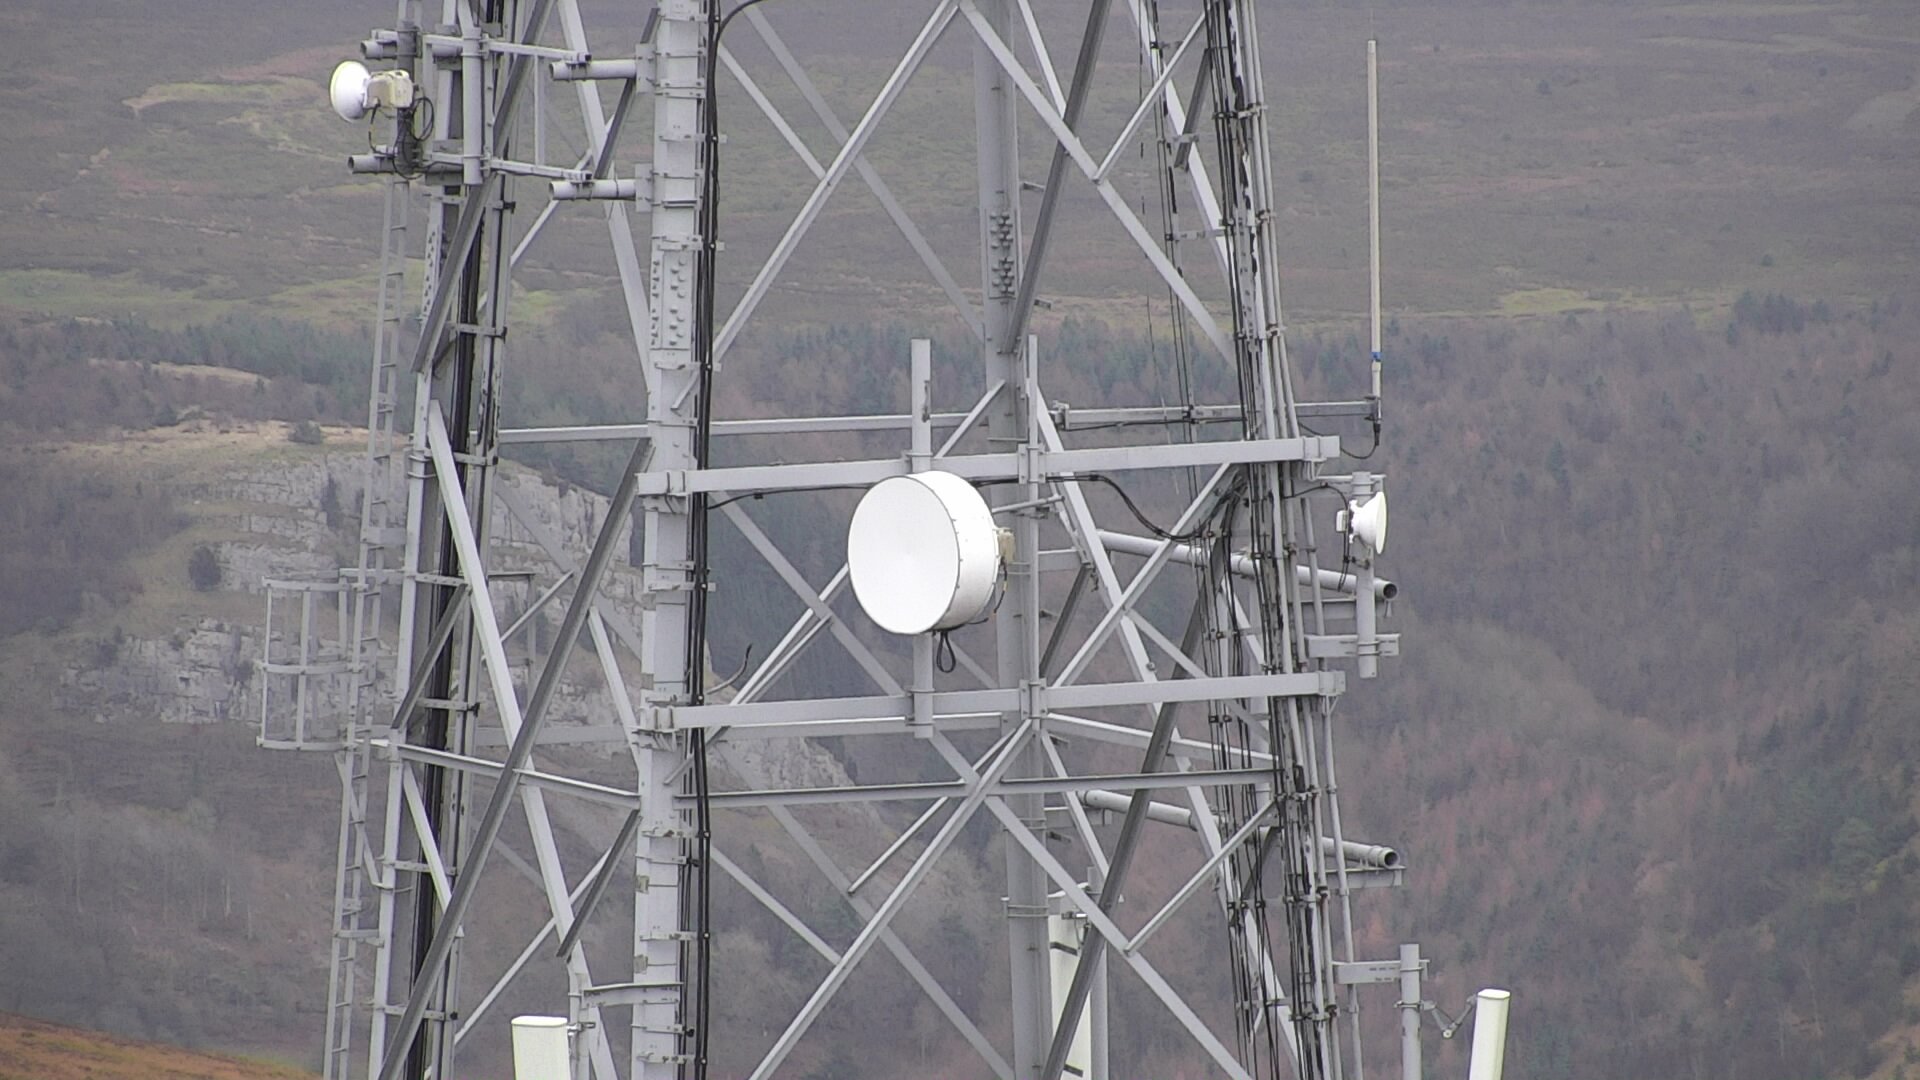 MOBILE PHONE MAST INSPECTION